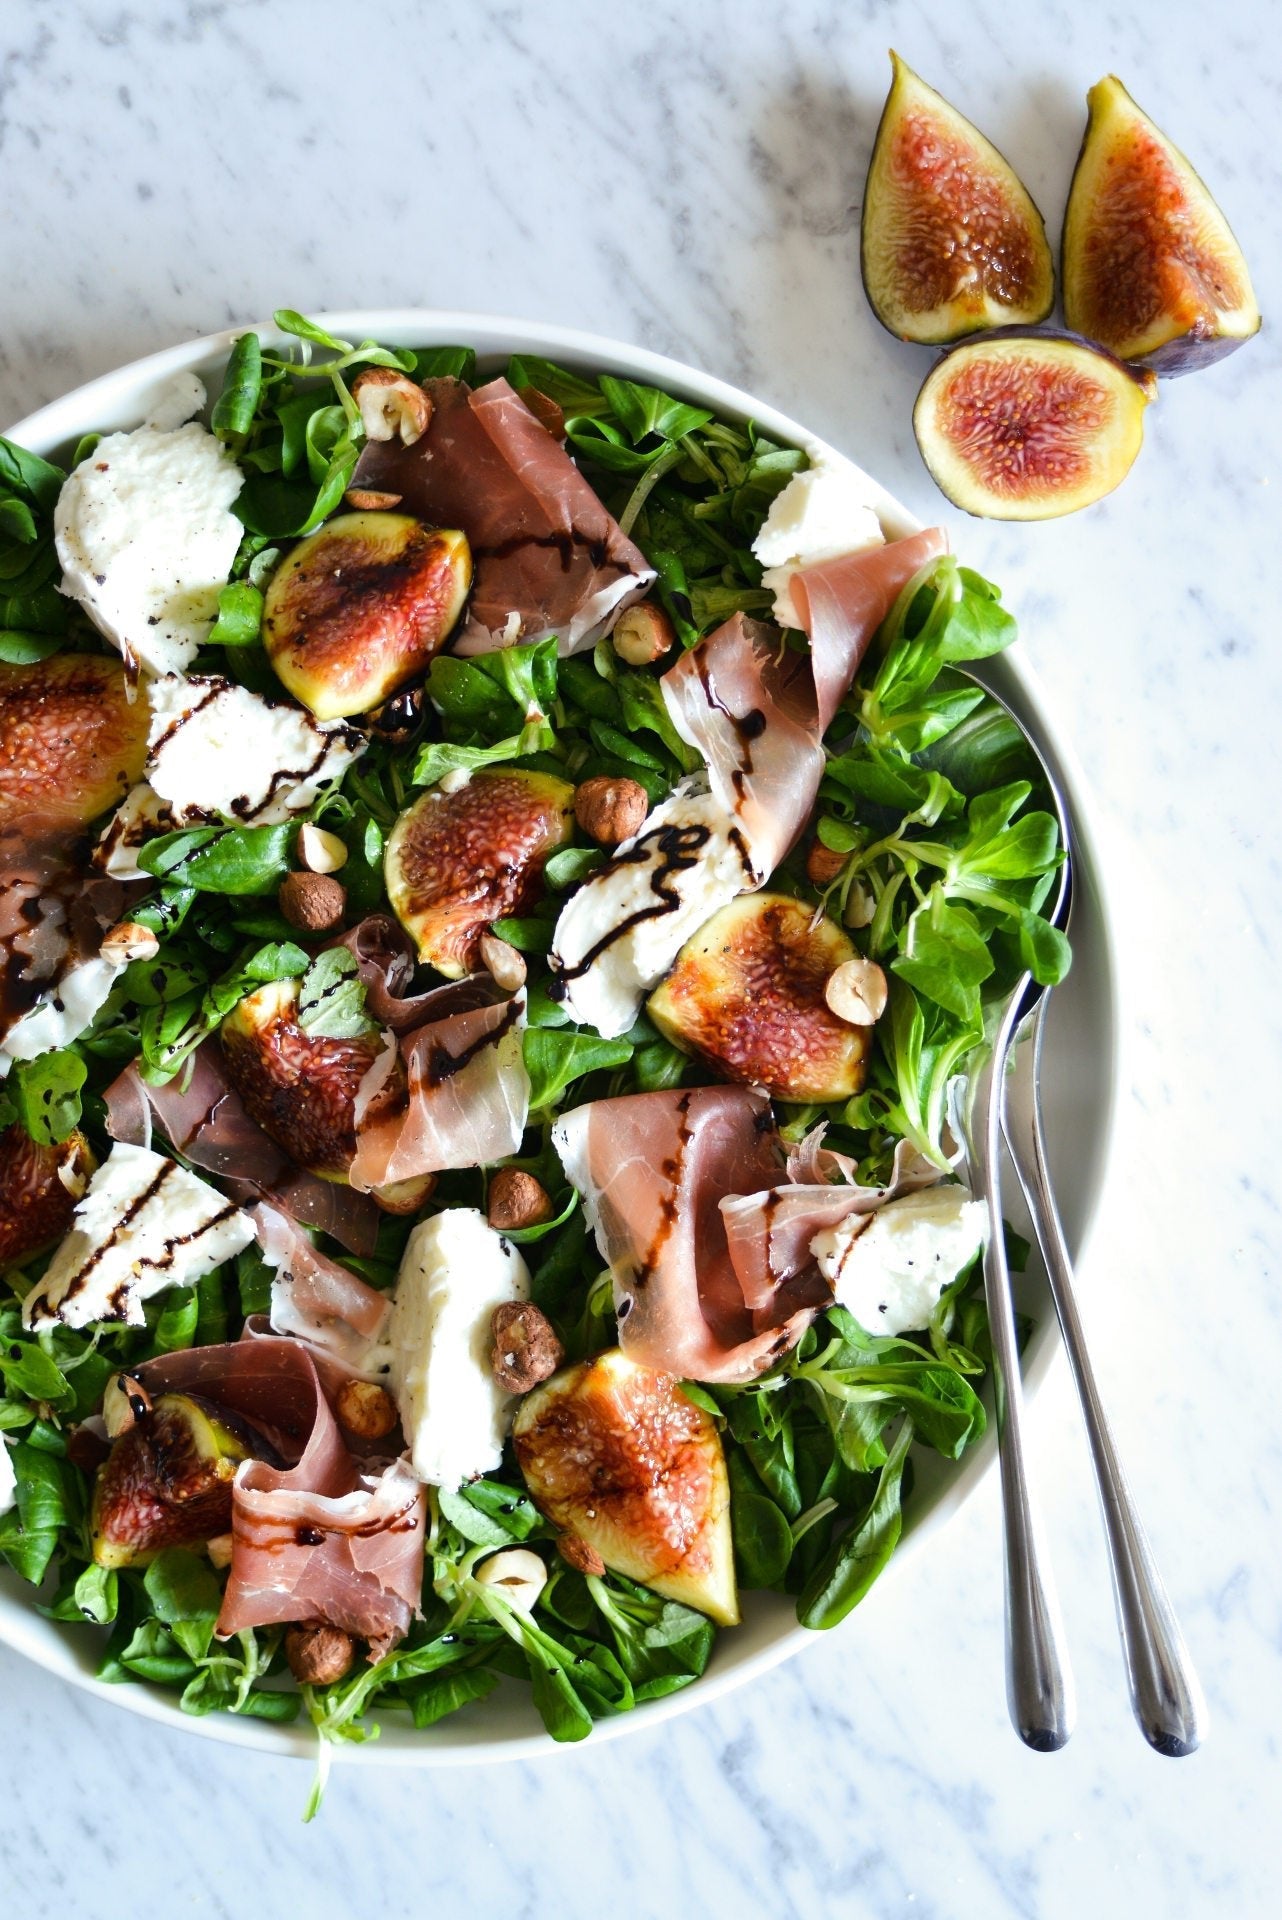 End of Summer Salad. Seasonal Figs, Songino, Burrata and Prosciutto. And Balsamic Vinegar of course! - Feast Italy